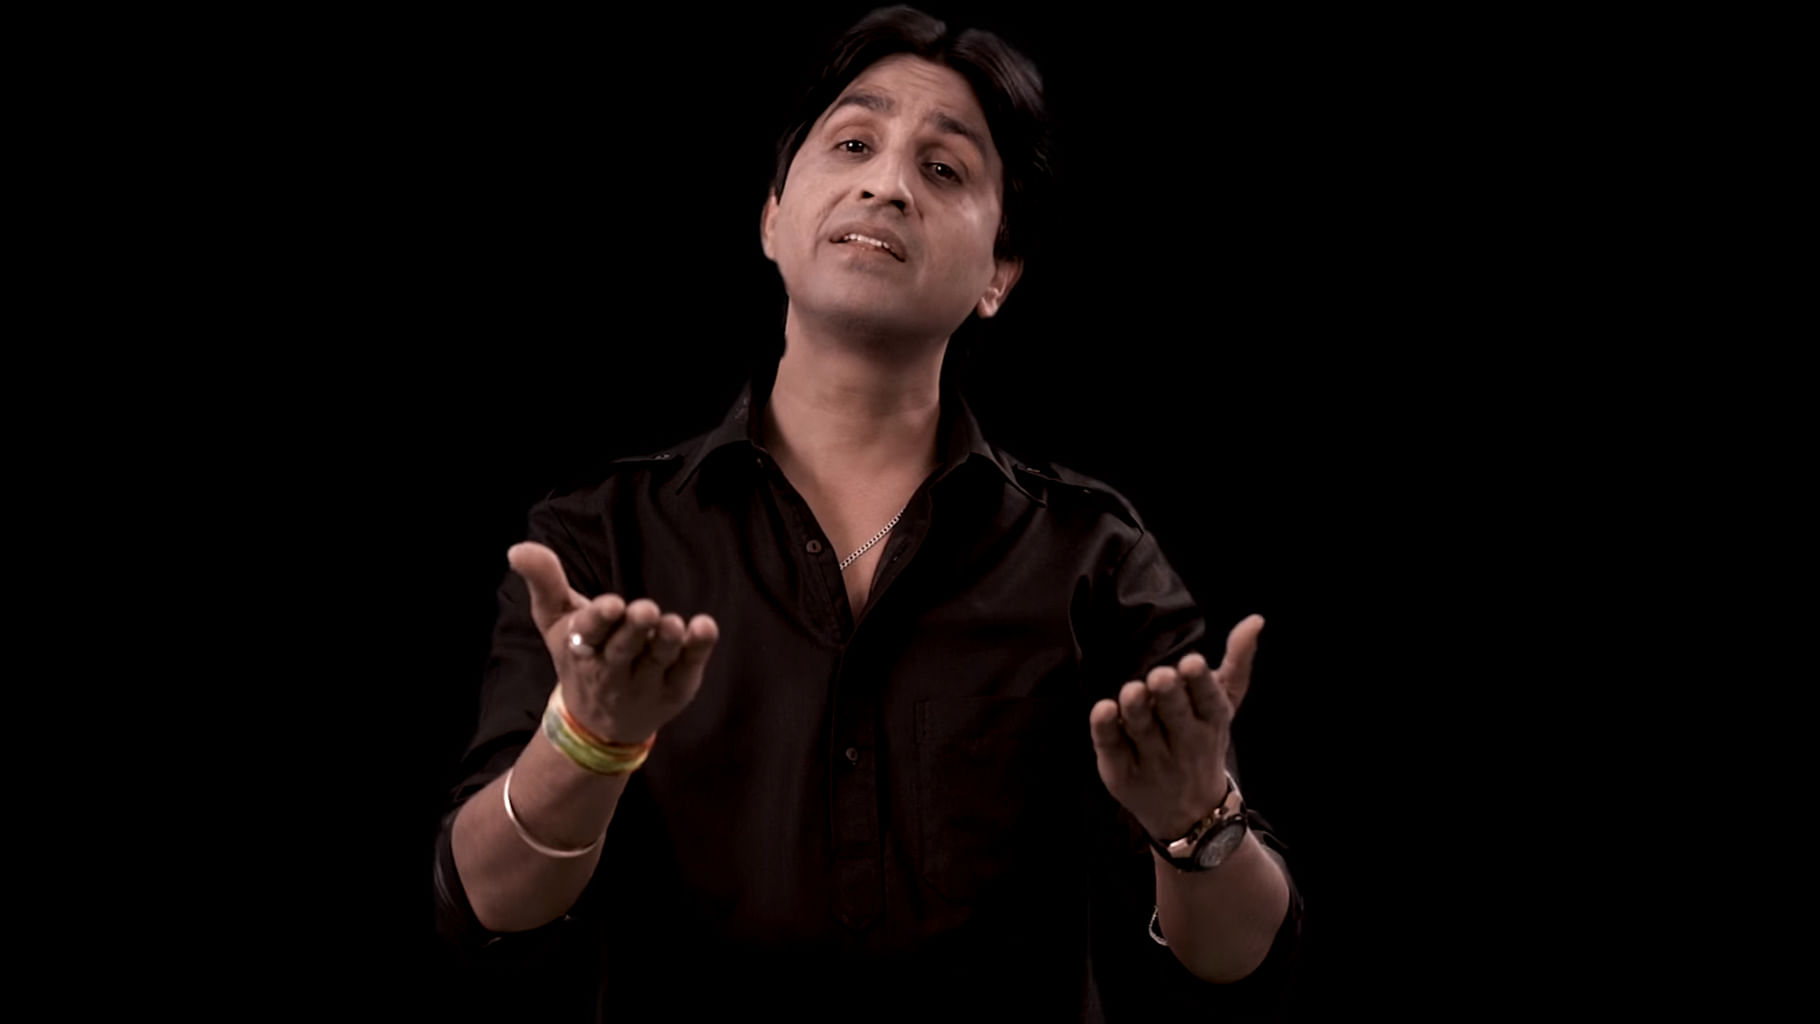 The song was written and performed by Kumar Vishwas. (Photo: YouTube Screengrab)